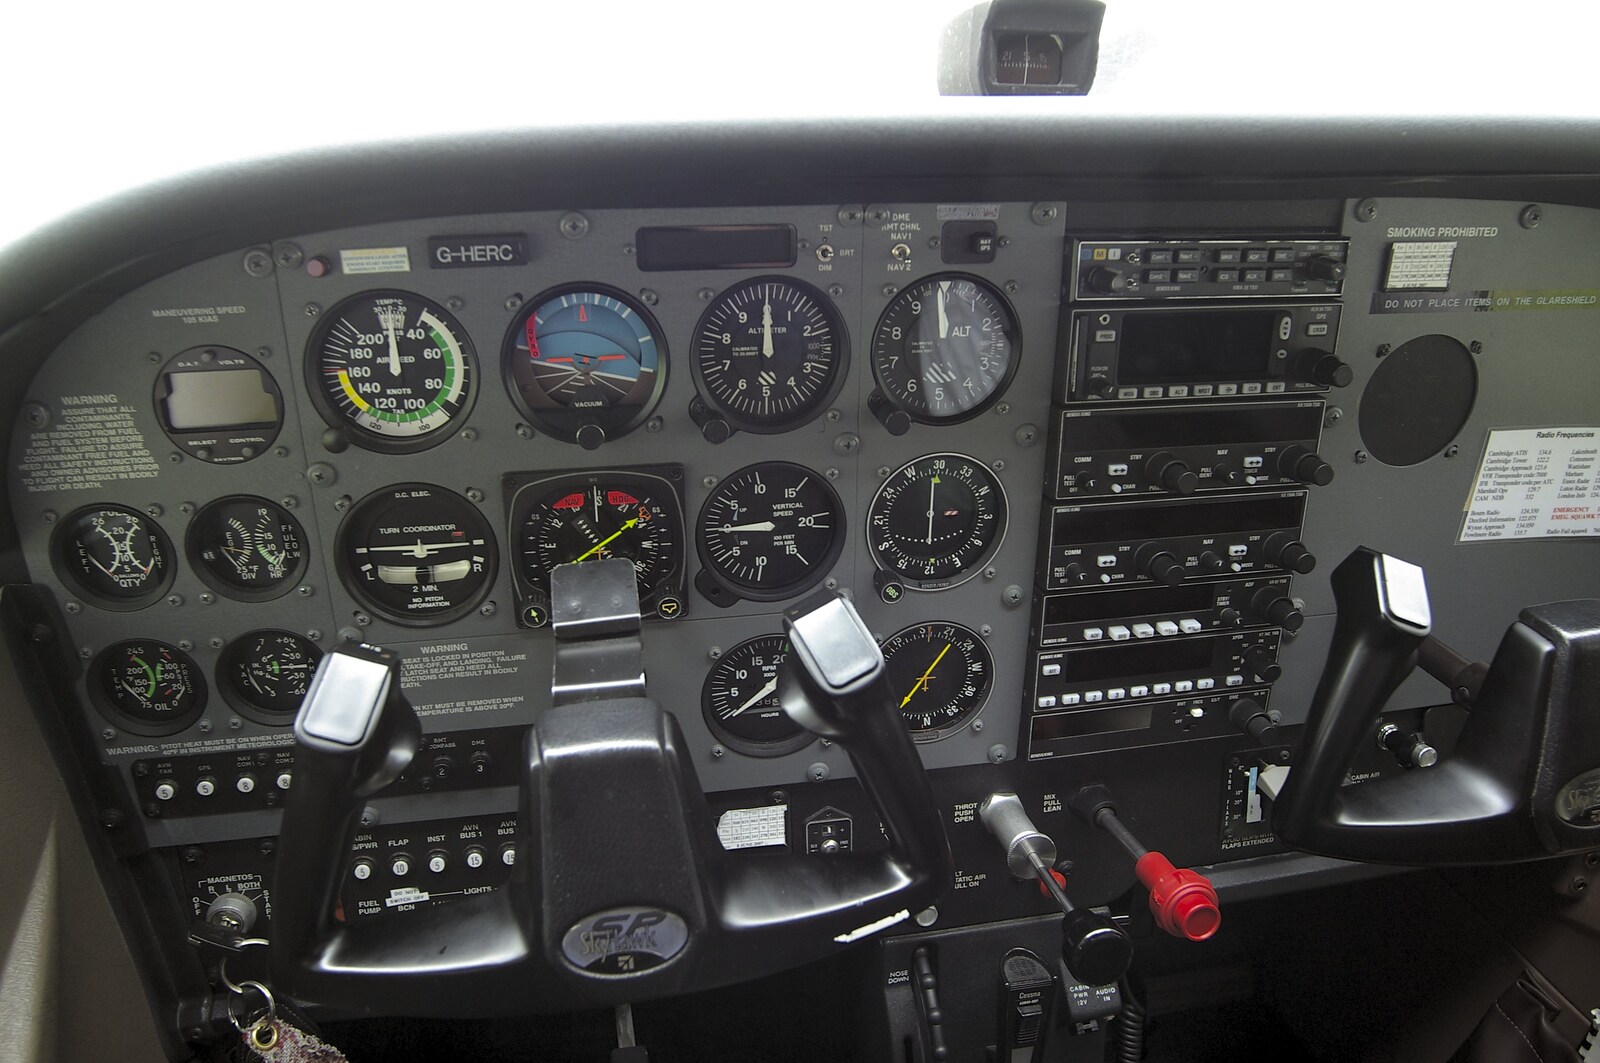 Nosher Flies a Plane, Cambridge Airport, Cambridge - 28th May 2008: The cockpit of the Cessna